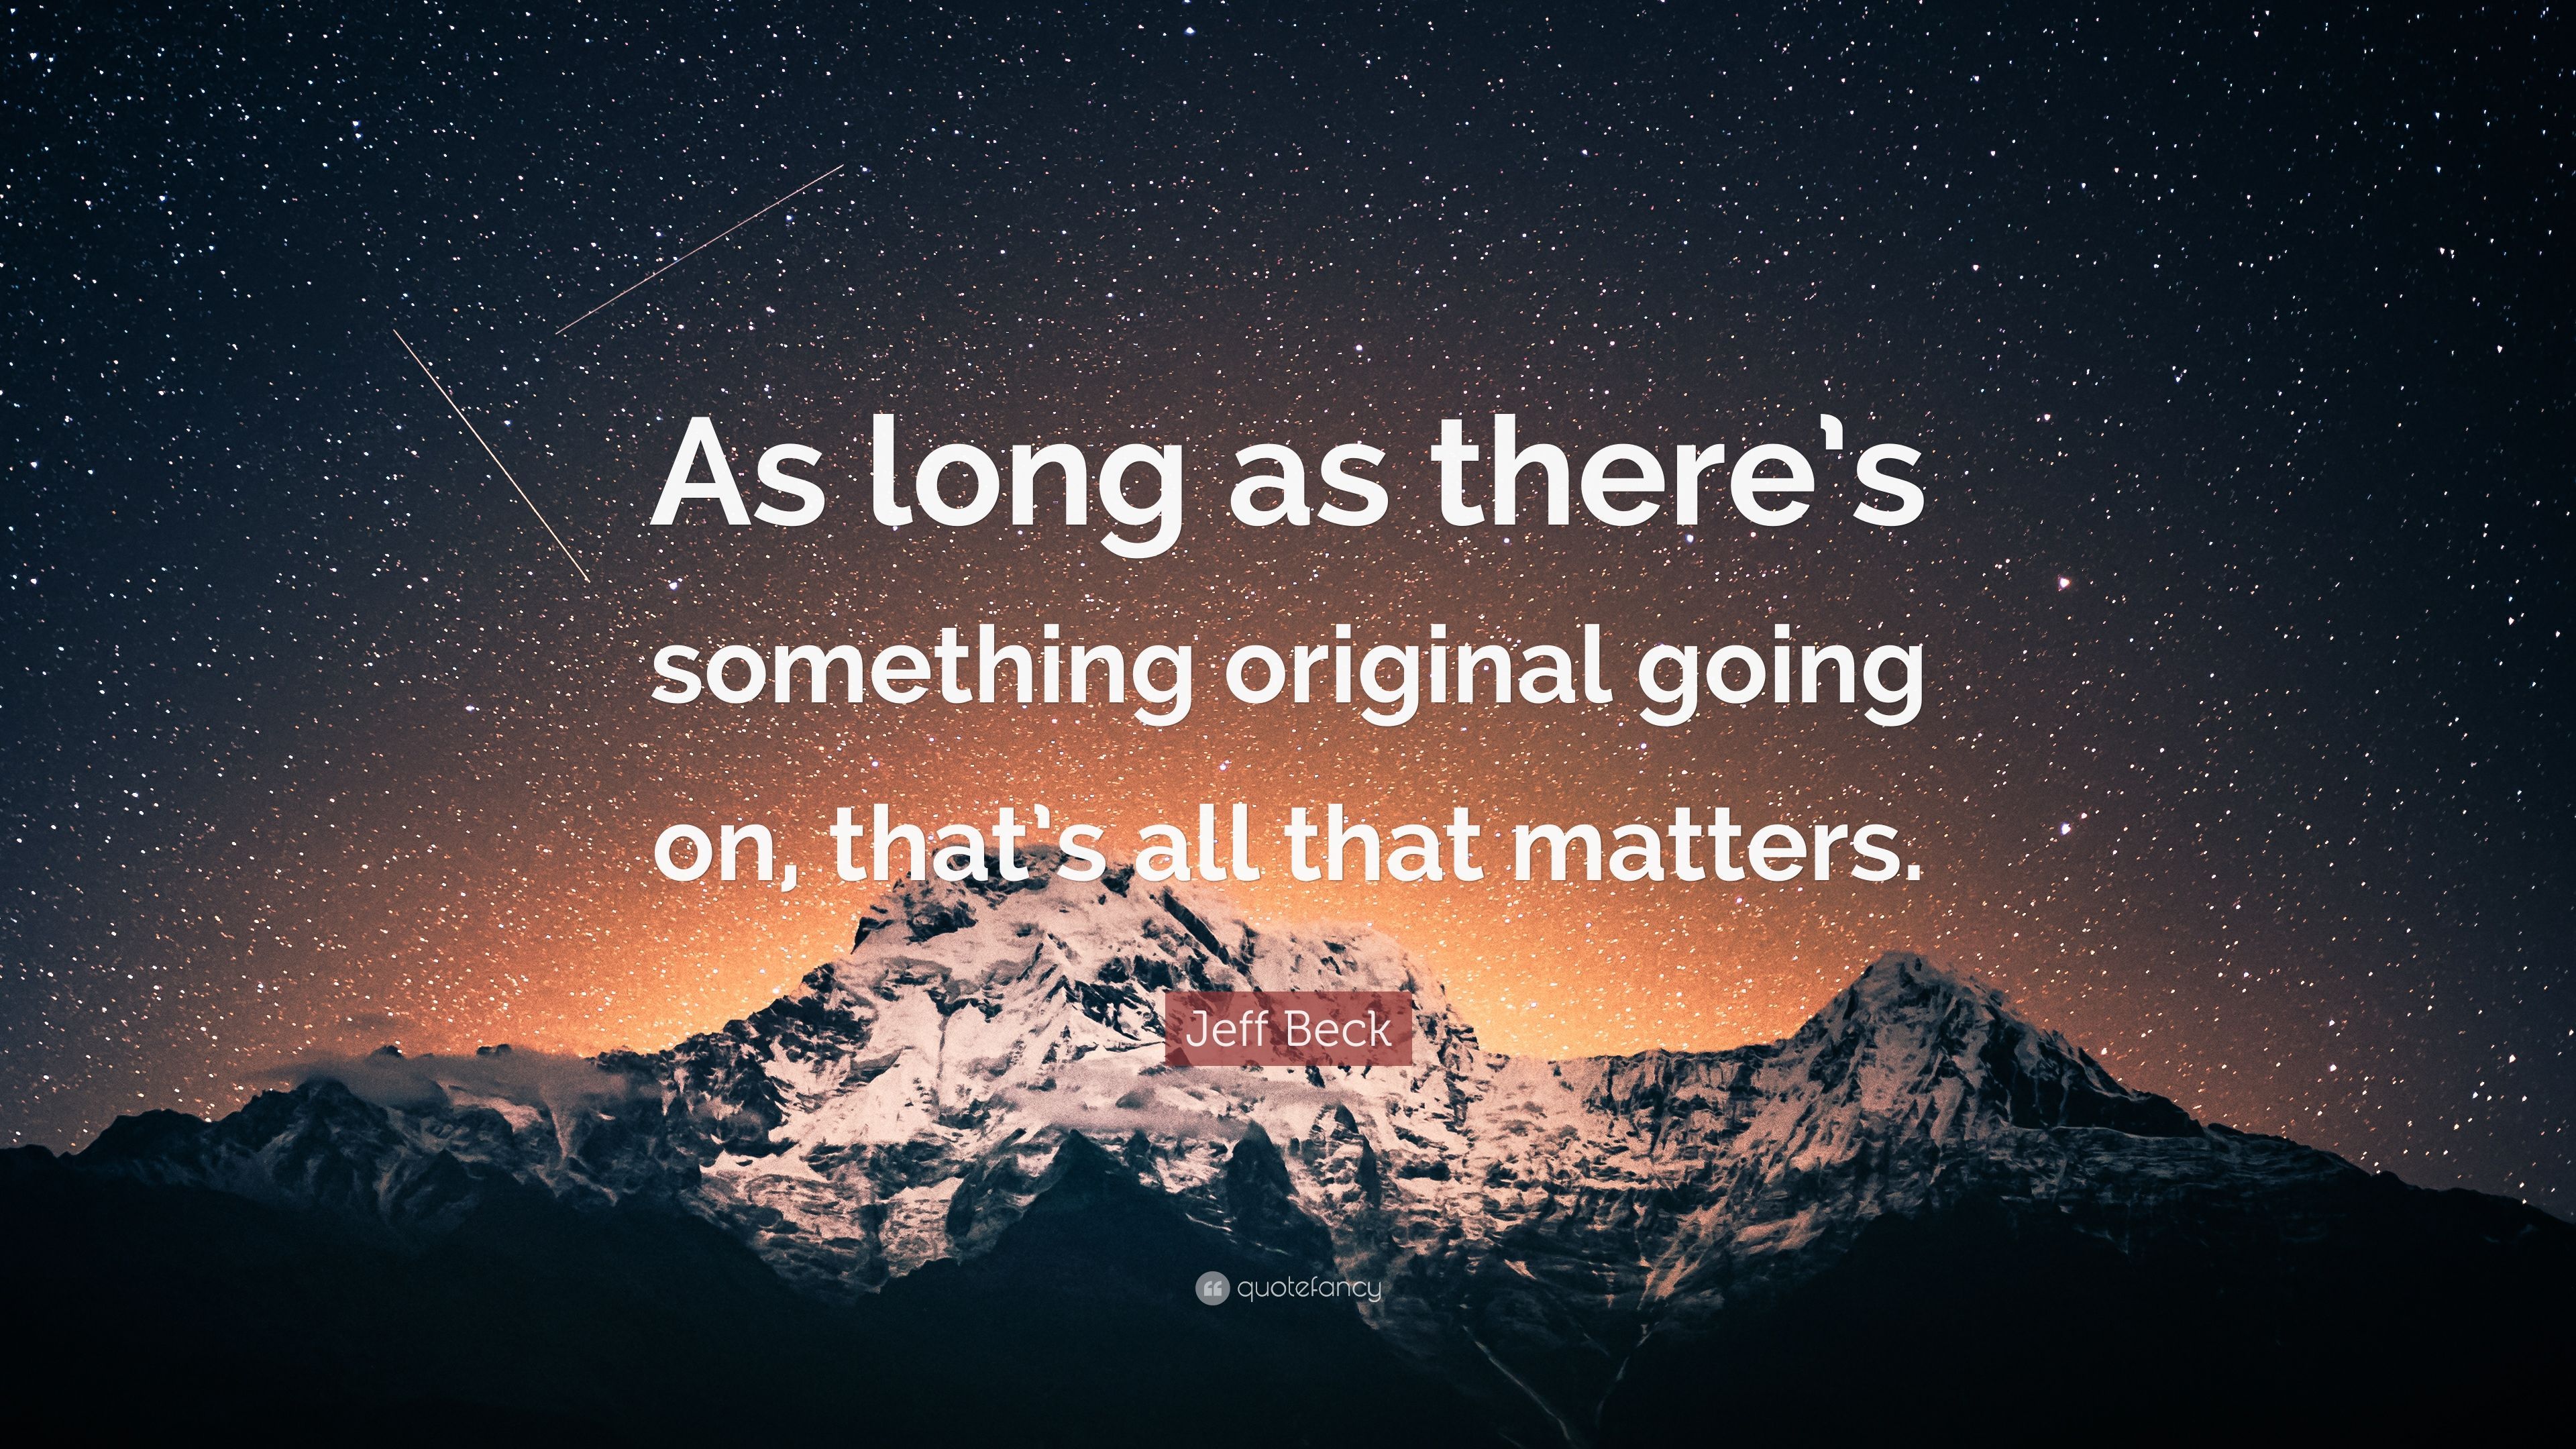 Jeff Beck Quote: “As long as there's something original going